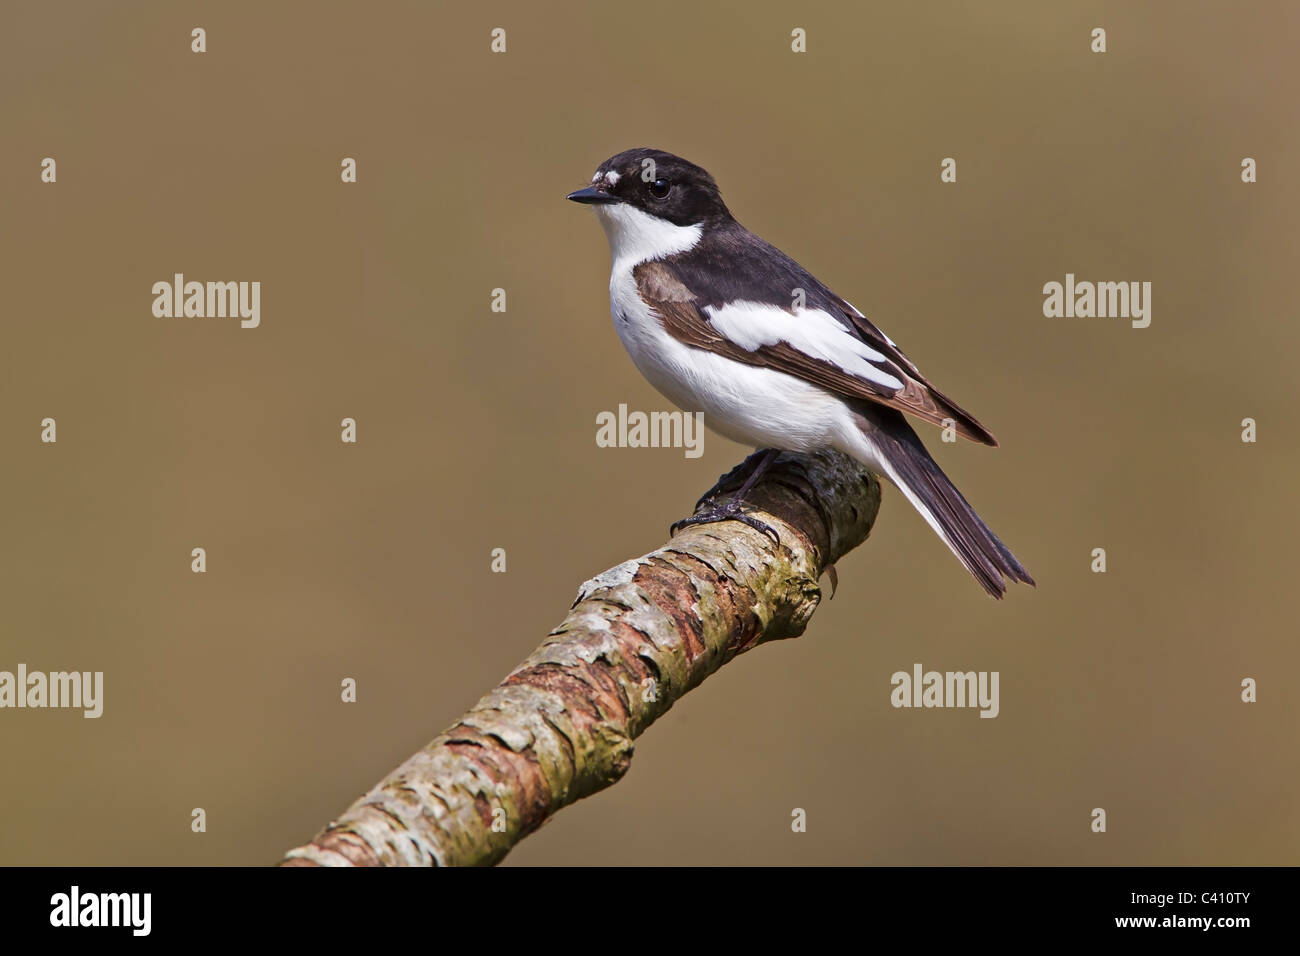 Pied Flycatcher perched on a branch. Stock Photo